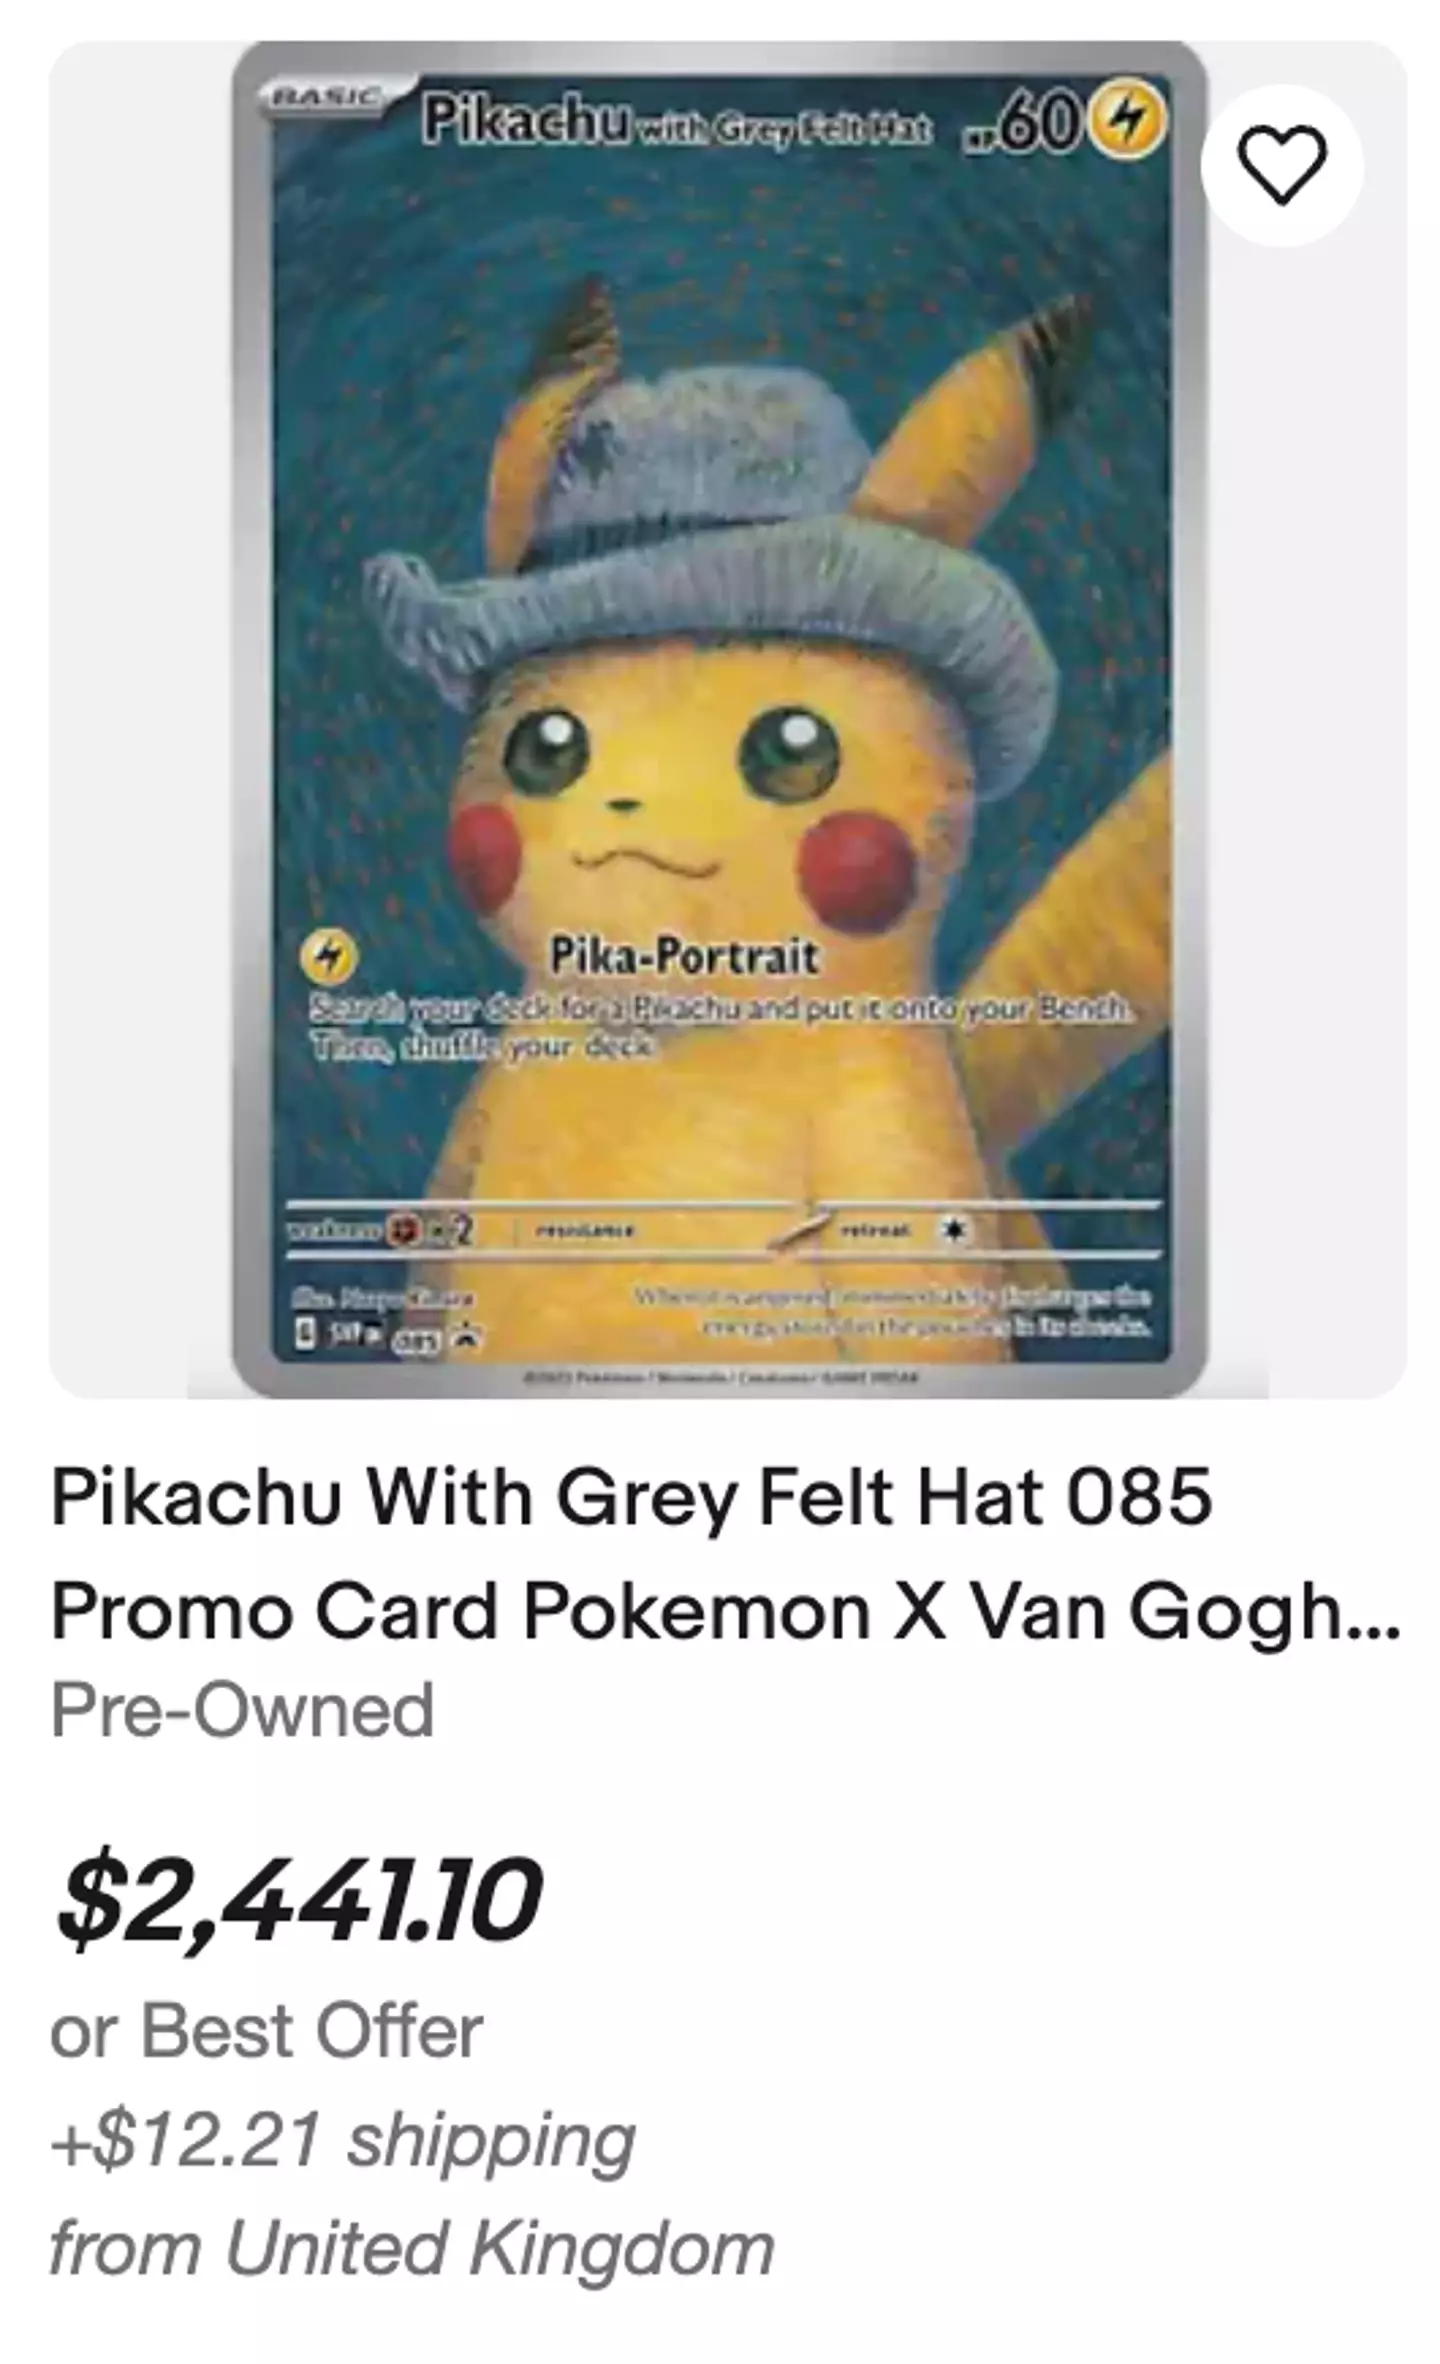 The cards are being listed at staggering prices.